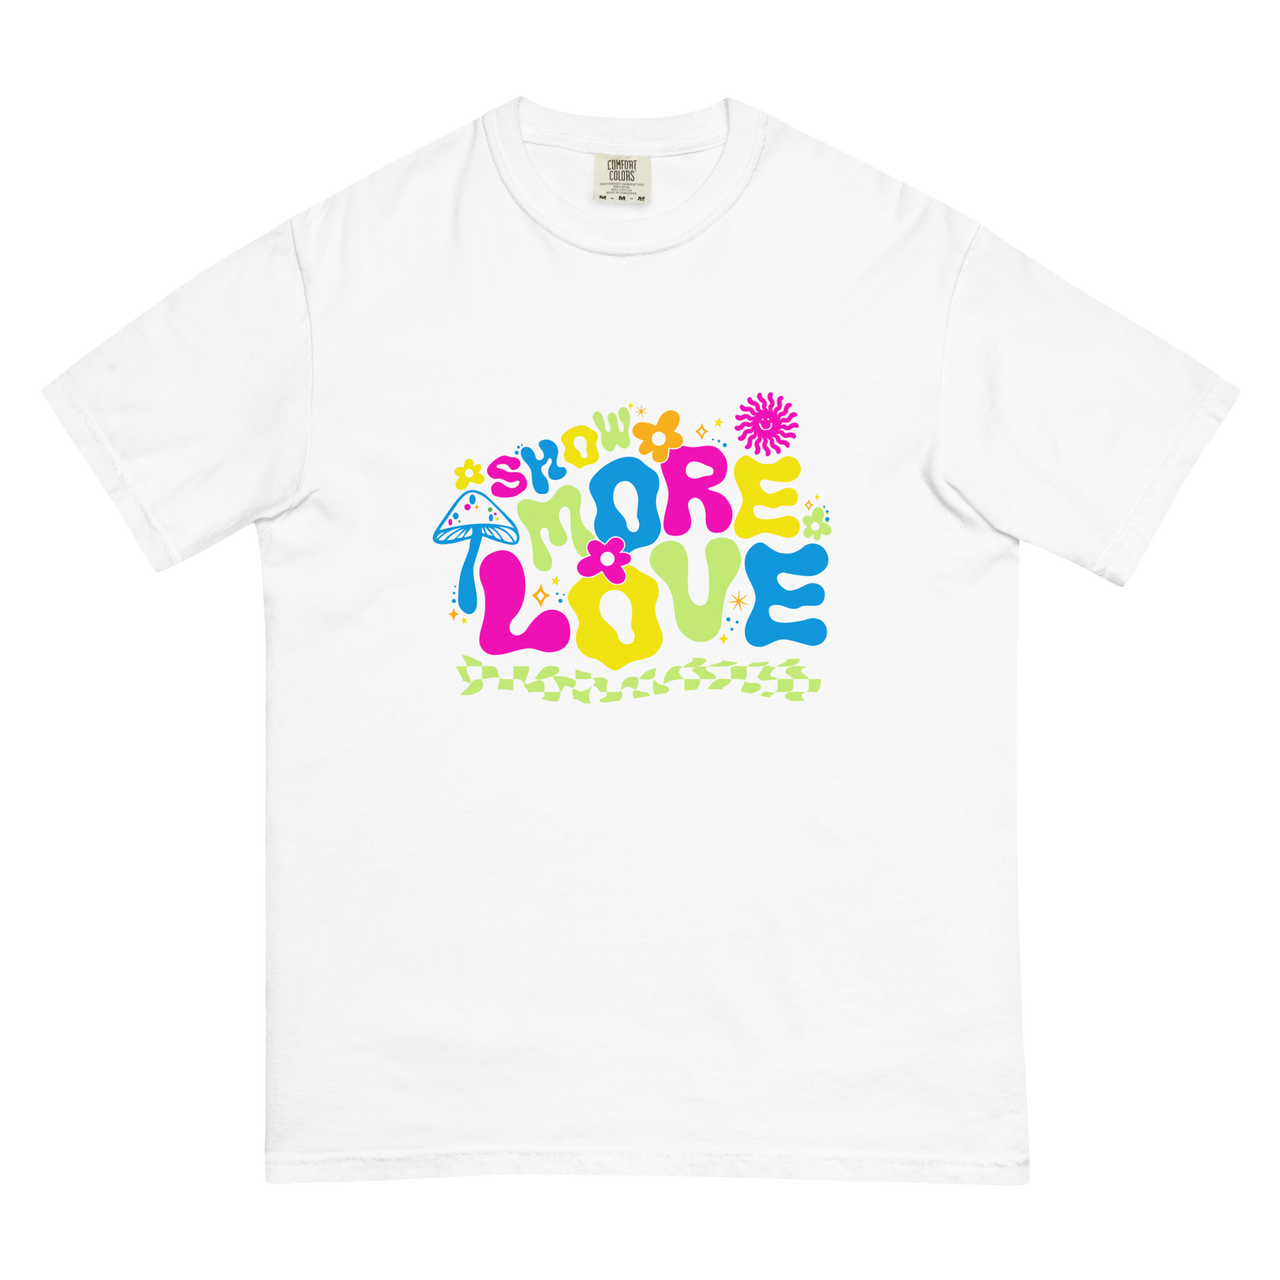 Show More Love Color Tee - Comfort Colors